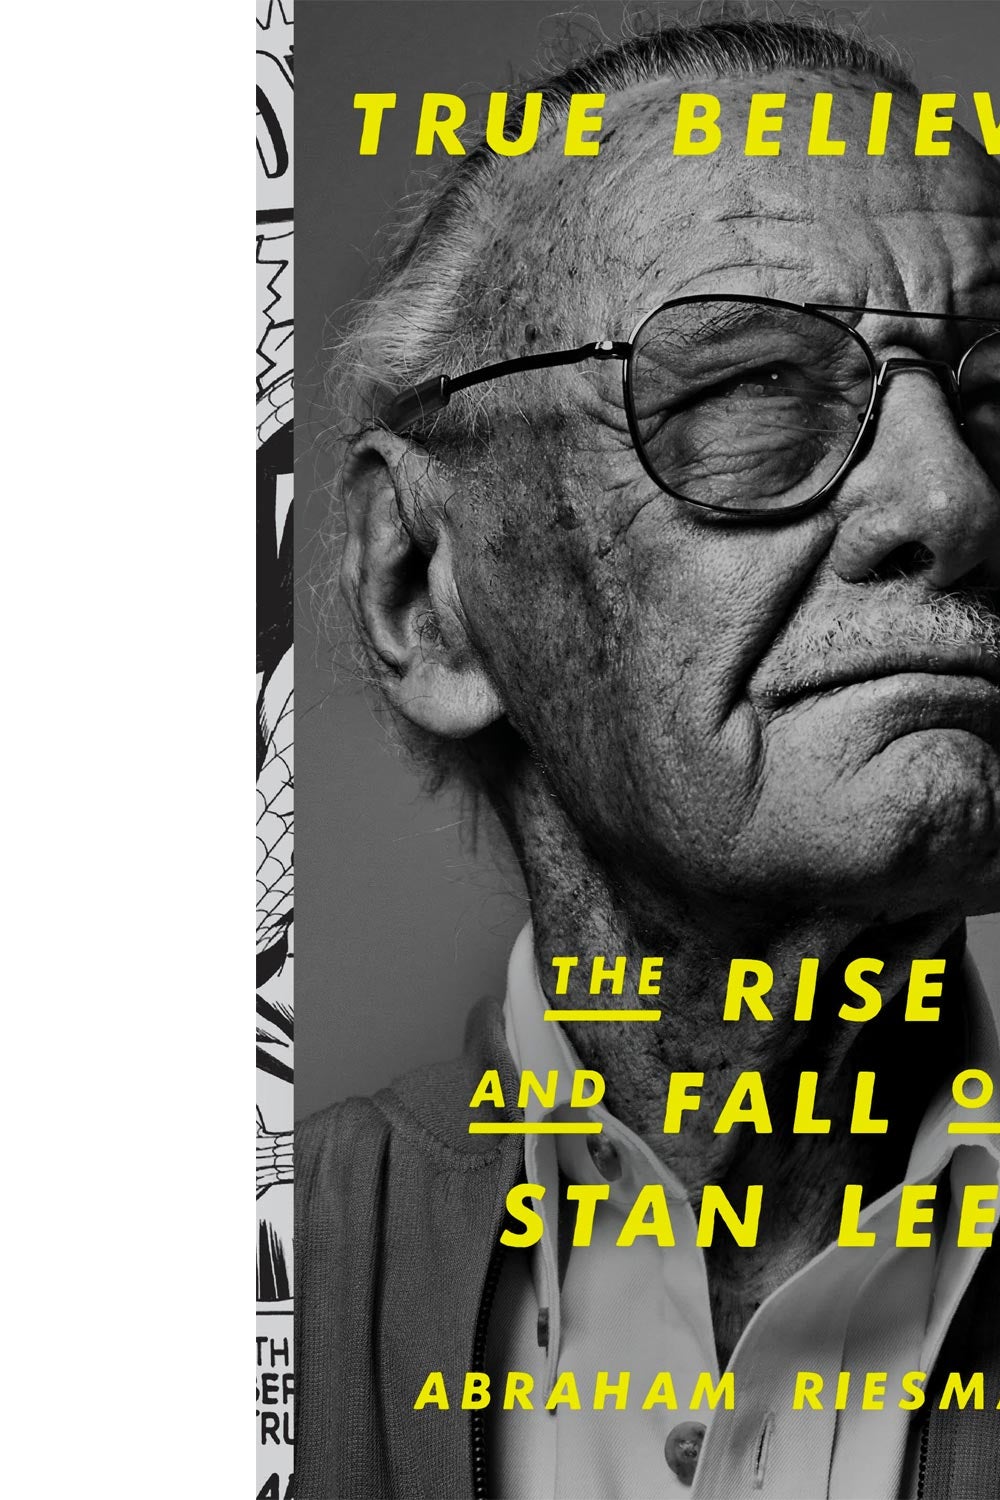 Book jacket showing book's title, subtitle, and author, and a photo of Stan Lee looking up and to his left, frowning a little, in glasses and a suit without a tie